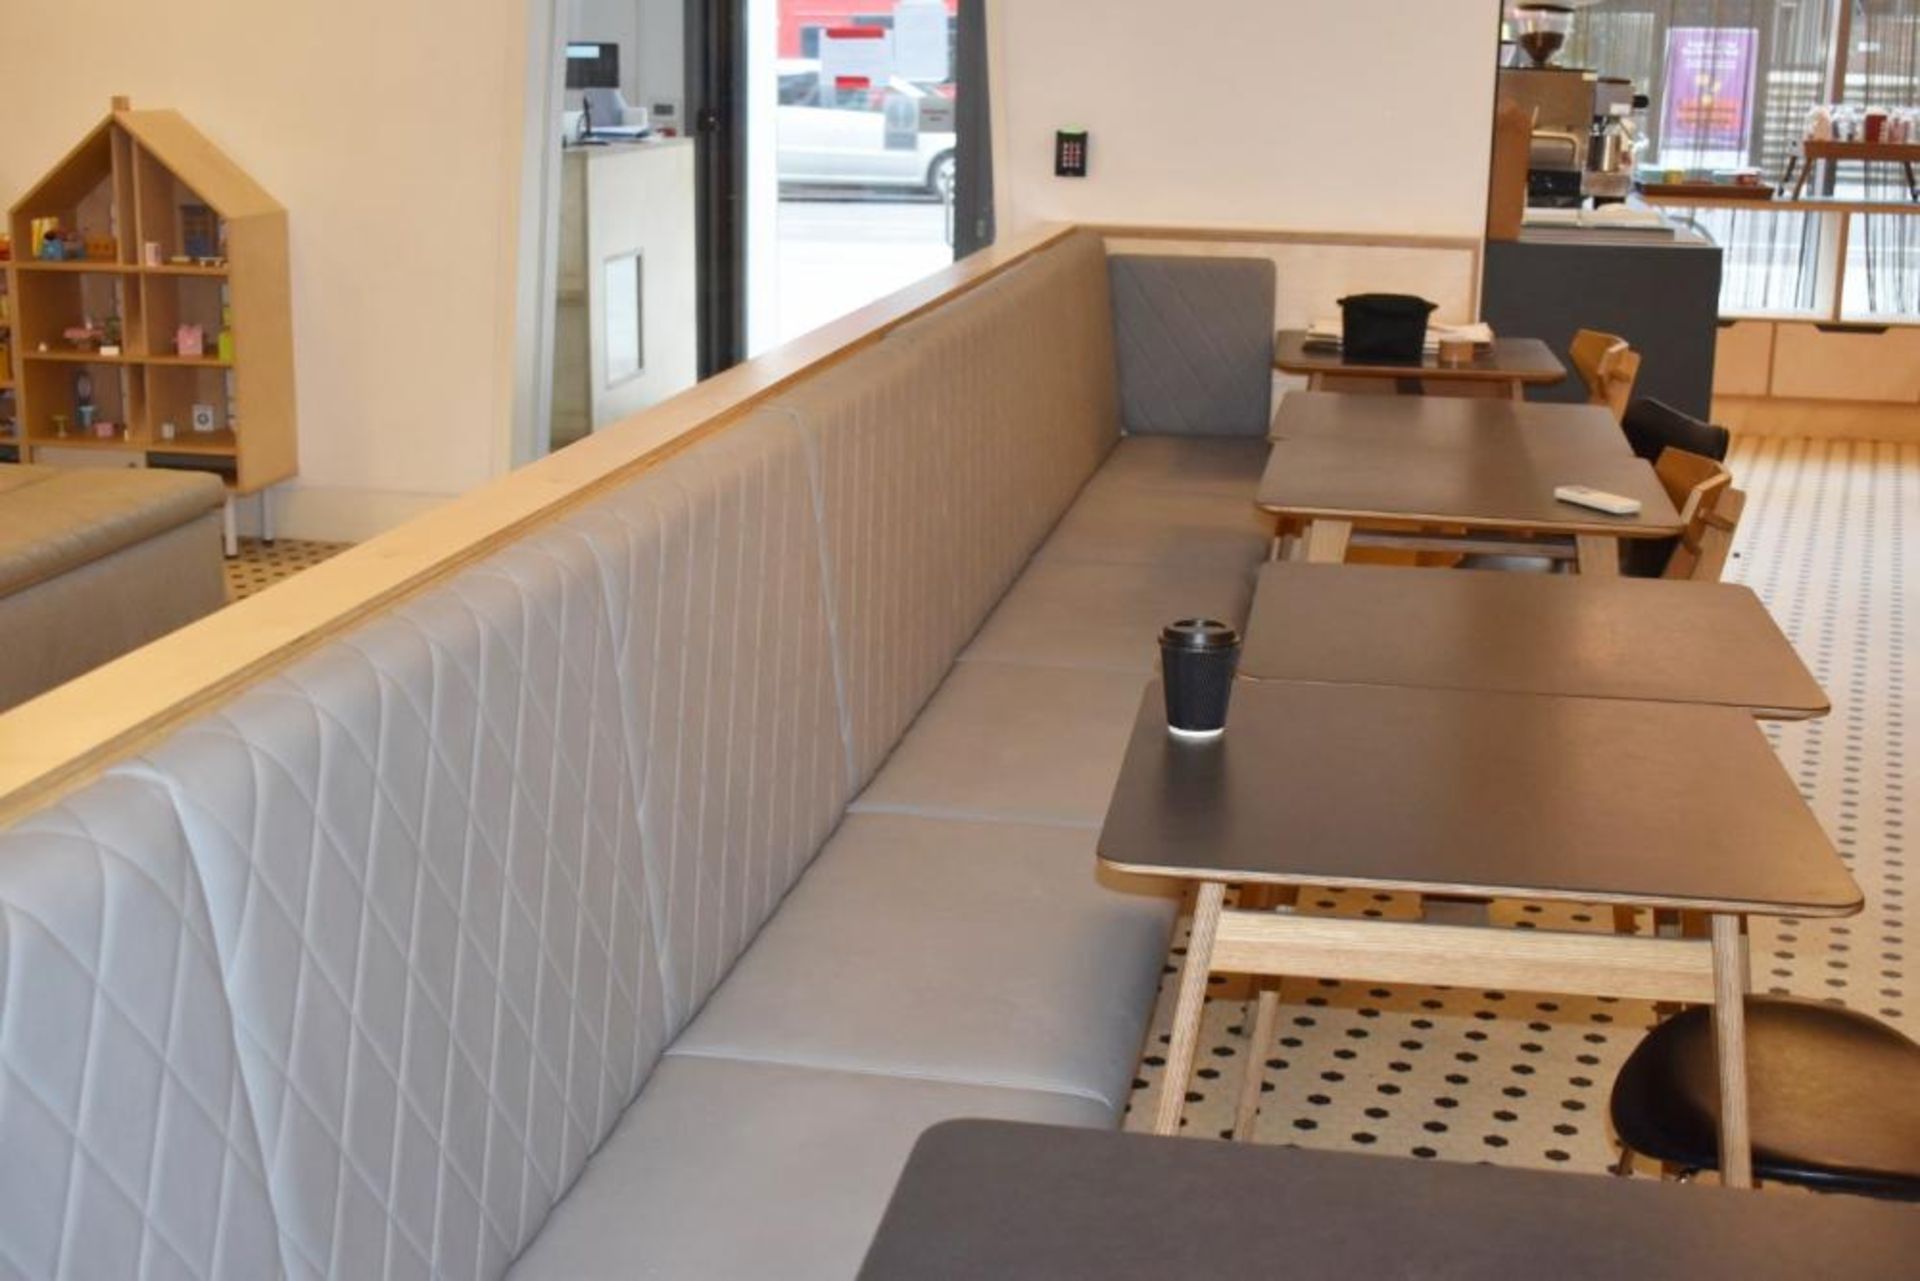 1 x Seating Banquette With Diamond Faux Leather Design Upholstery in Grey - Features Book / - Image 3 of 10